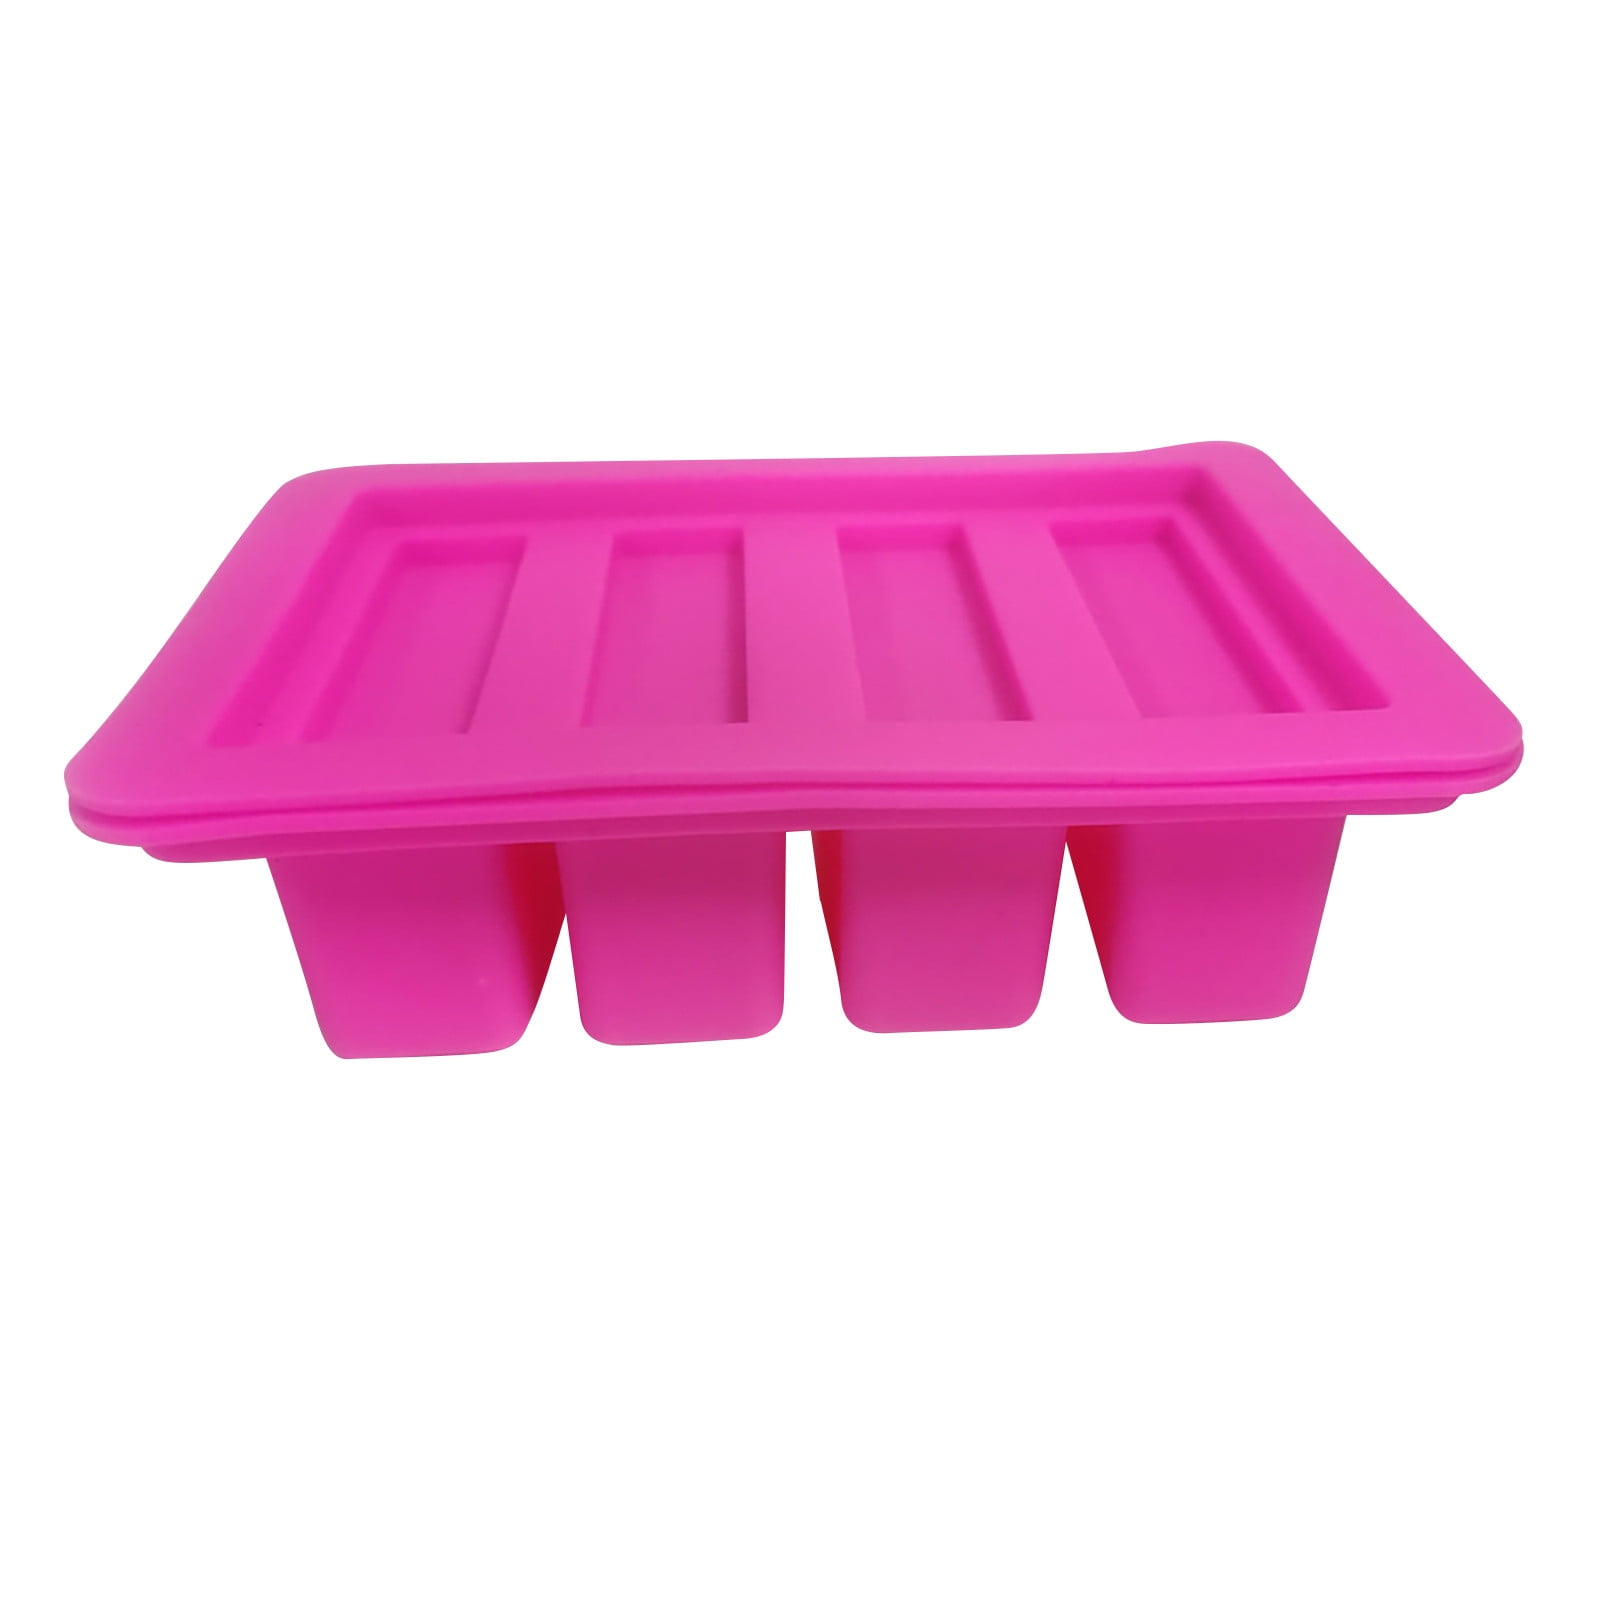 Silicone Butter Mold, Butter Molds Tray with Lid,Large Butter Maker with Food Grade Silicone Spatulas,Rectangle Container for Brownies,Homemade